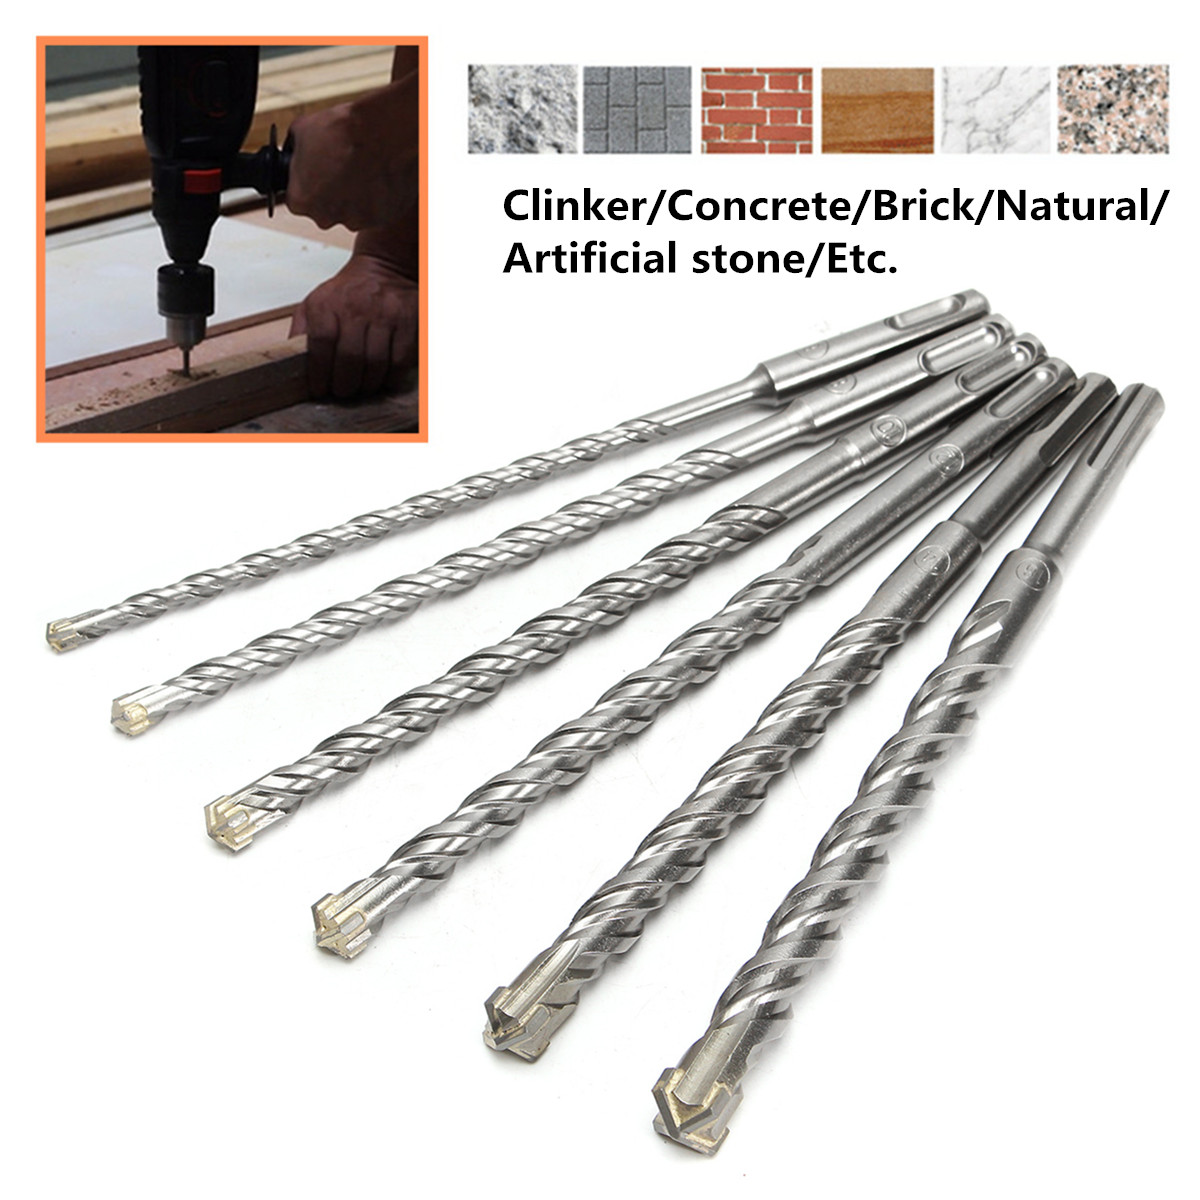 26cm Drill Bits 6/8/10/12/14/16mm for Electric Hammer Polisher Bi-Metal Cross Type Tungsten Steel SDS Plus for Masonry Concrete